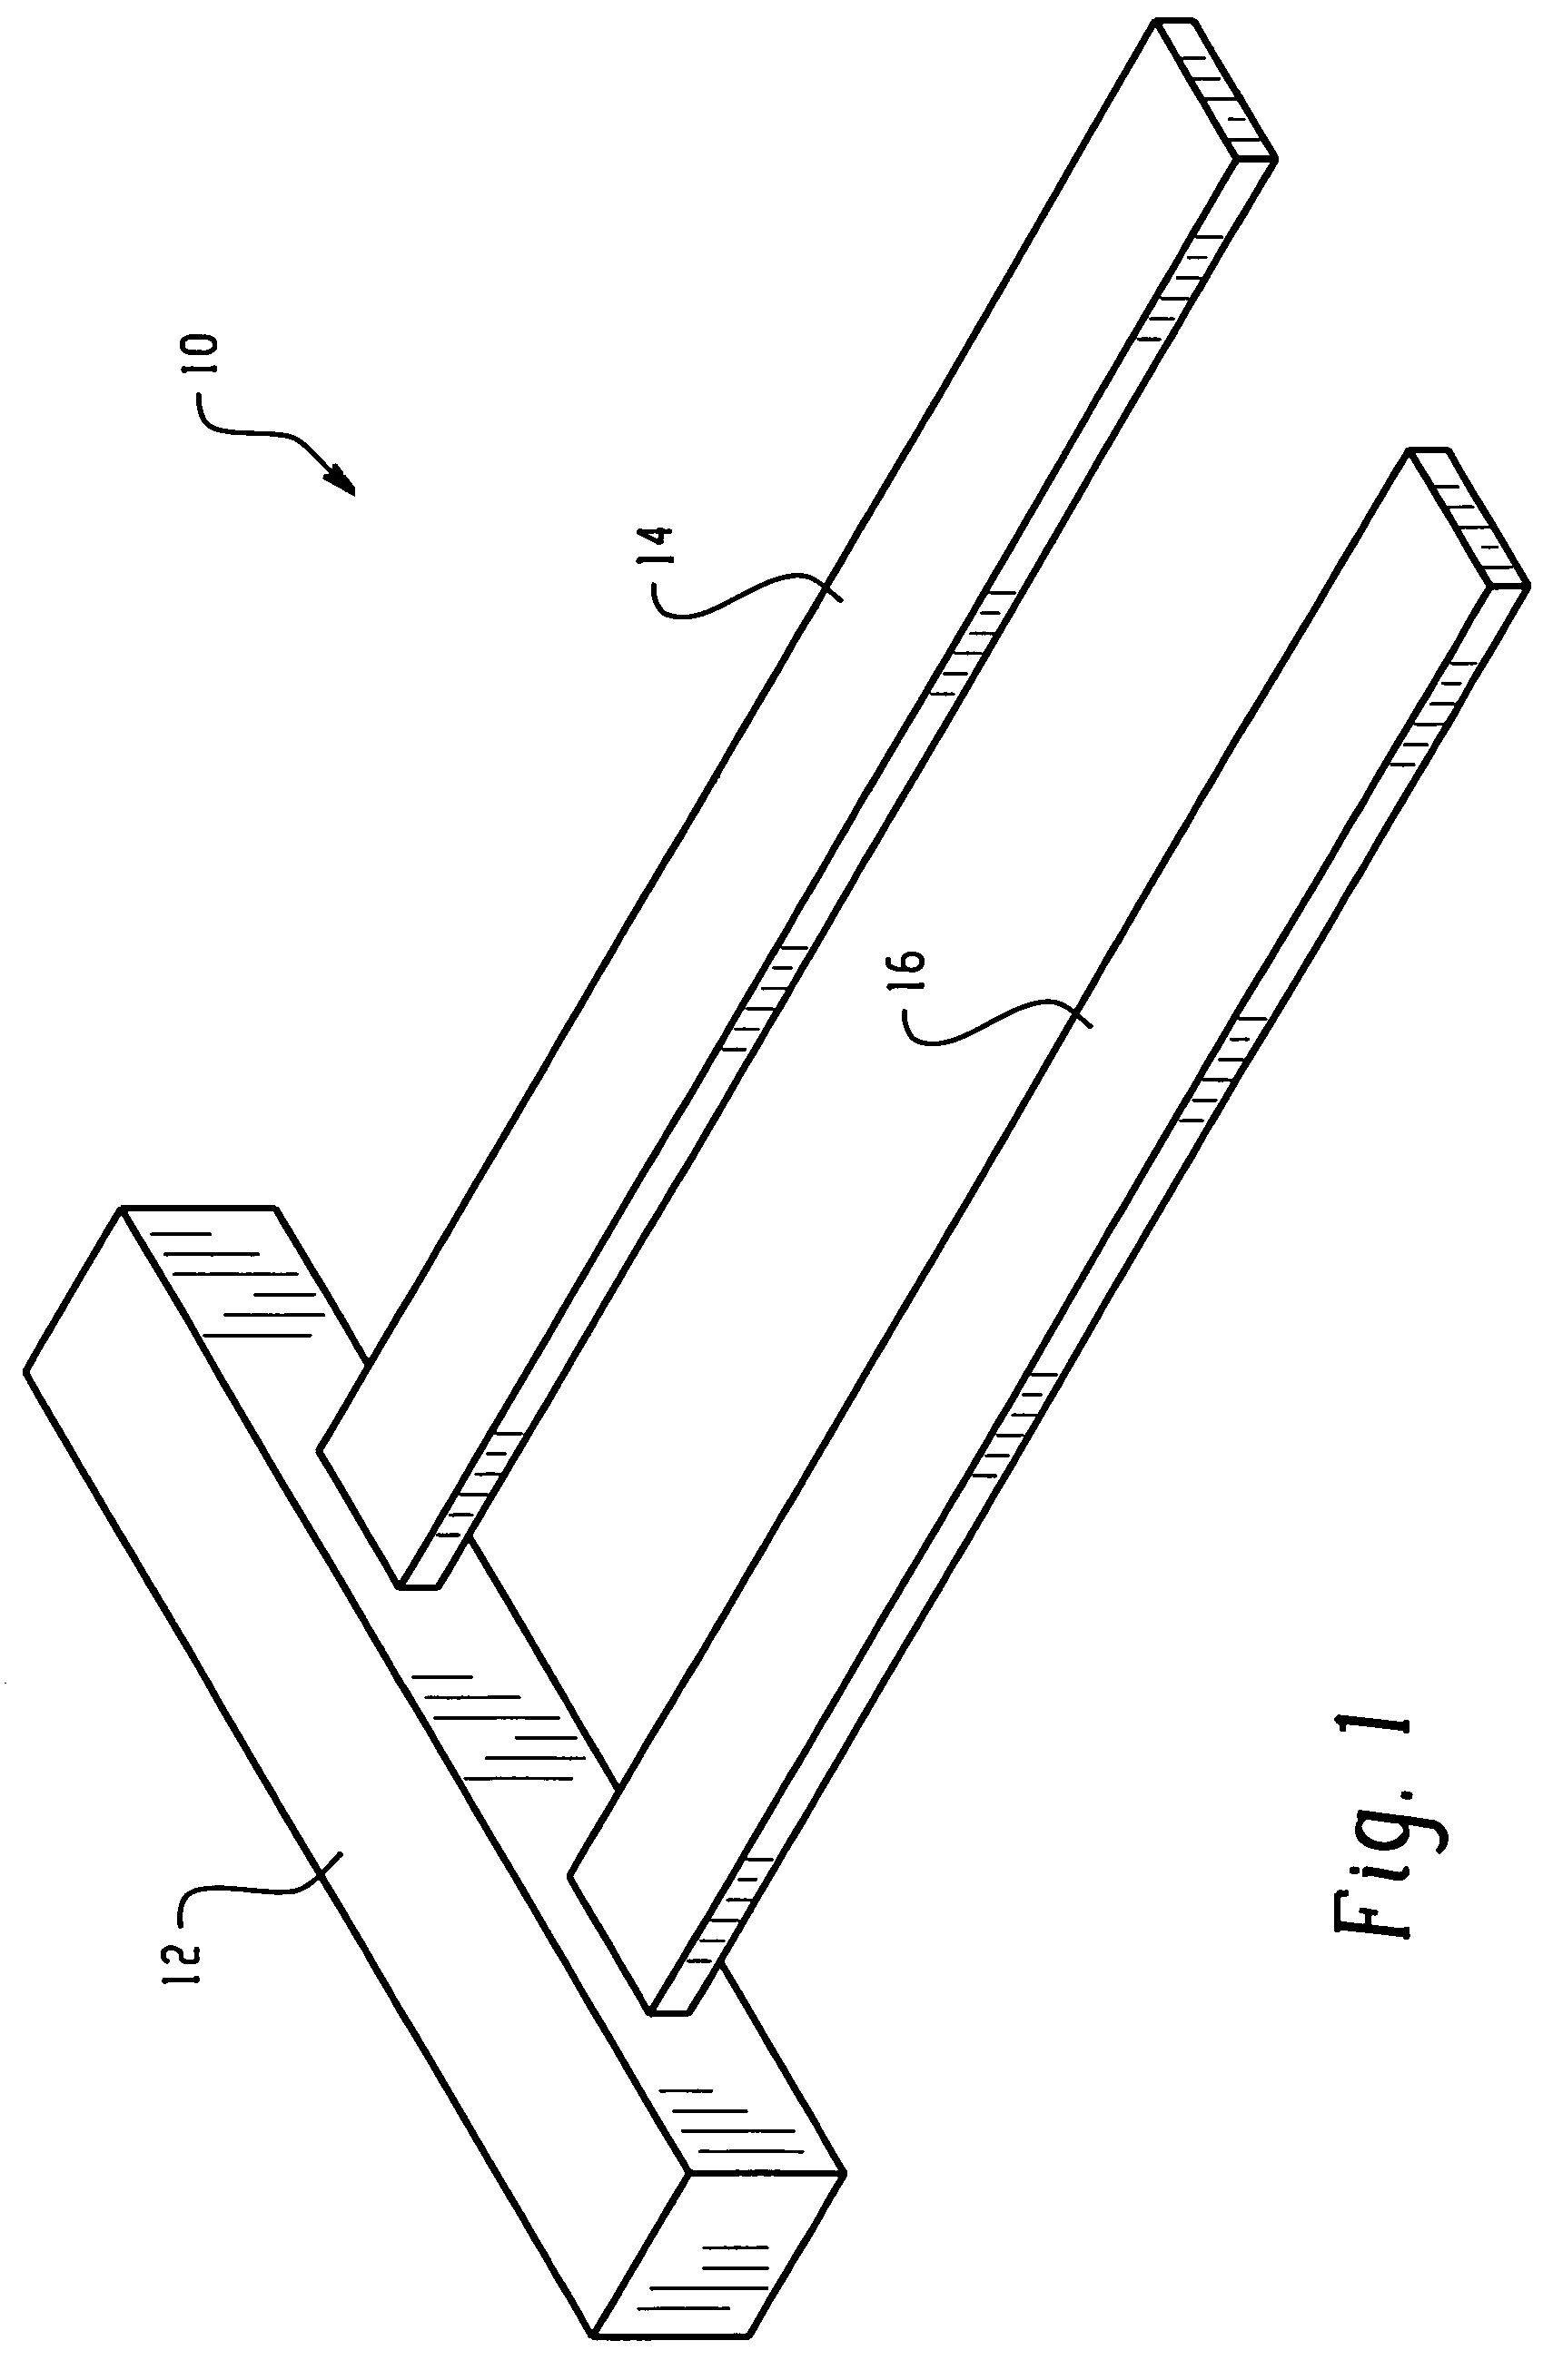 Shape memory polymer temperature sensing devices and methods of use